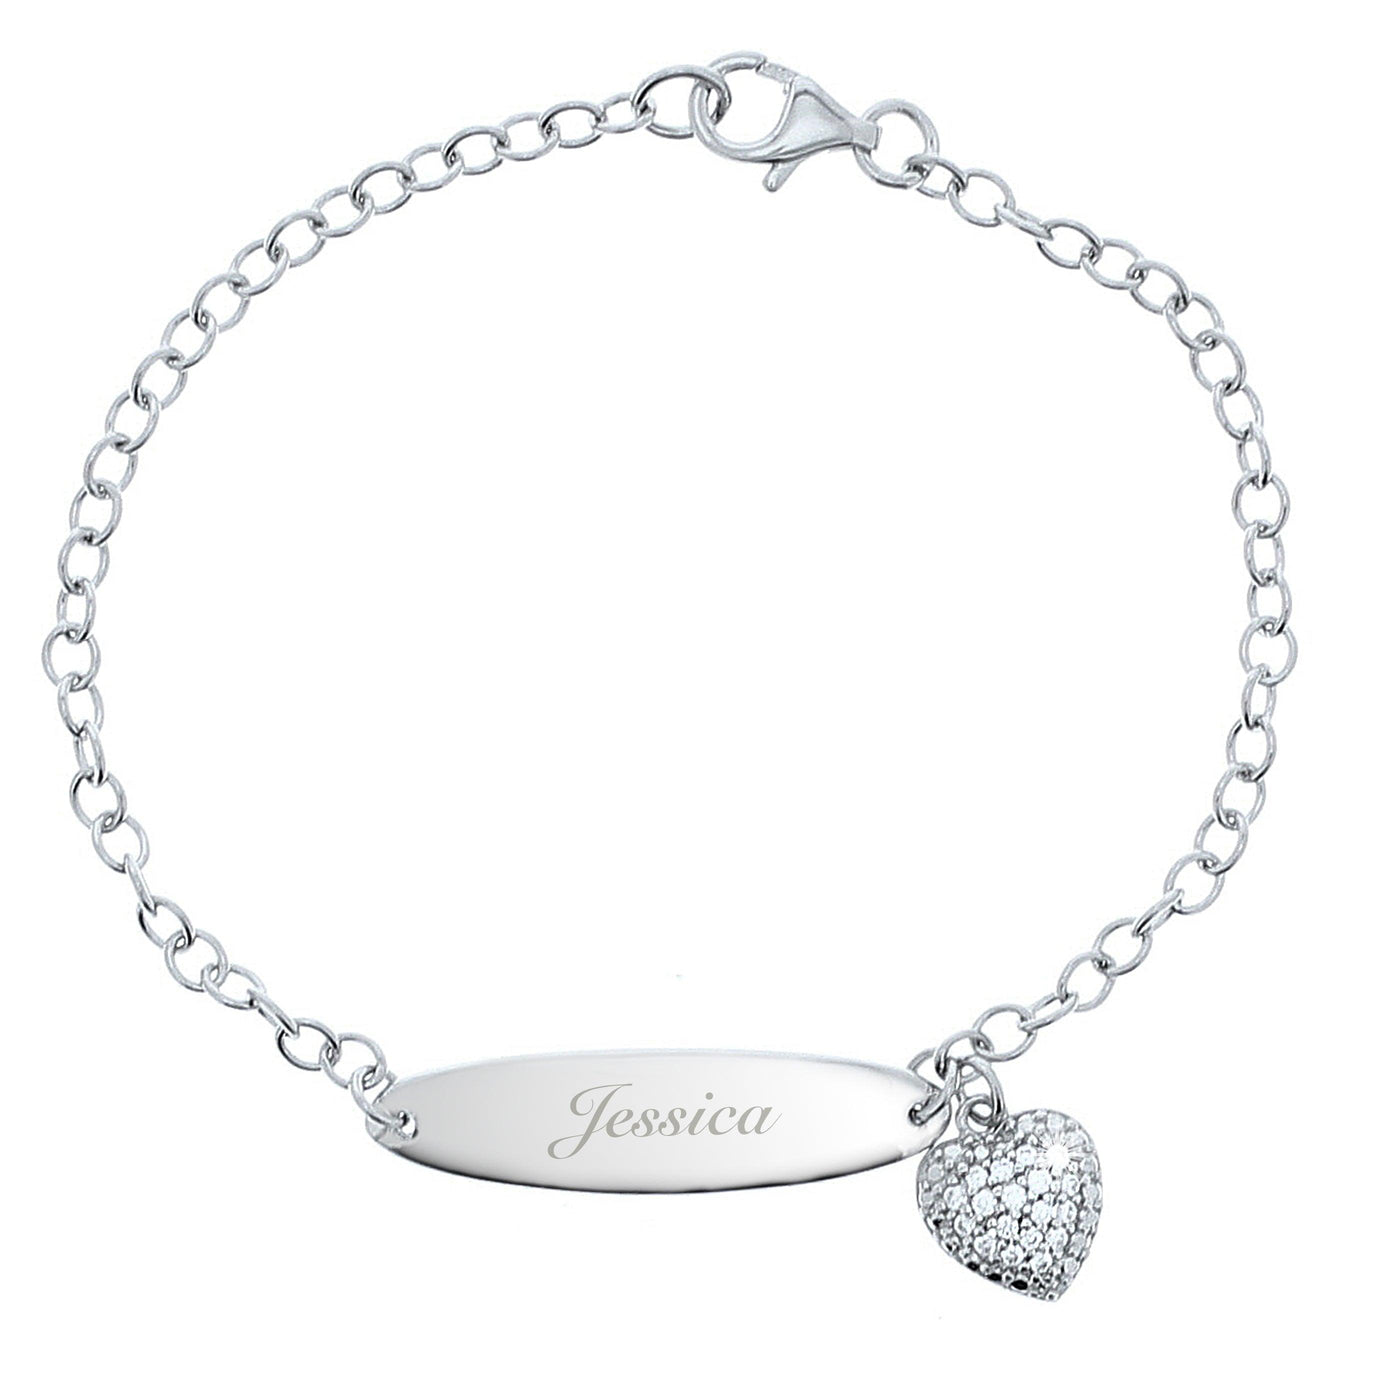 Personalised Children's Sterling Silver and Cubic Zirconia Bracelet - Shop Personalised Gifts